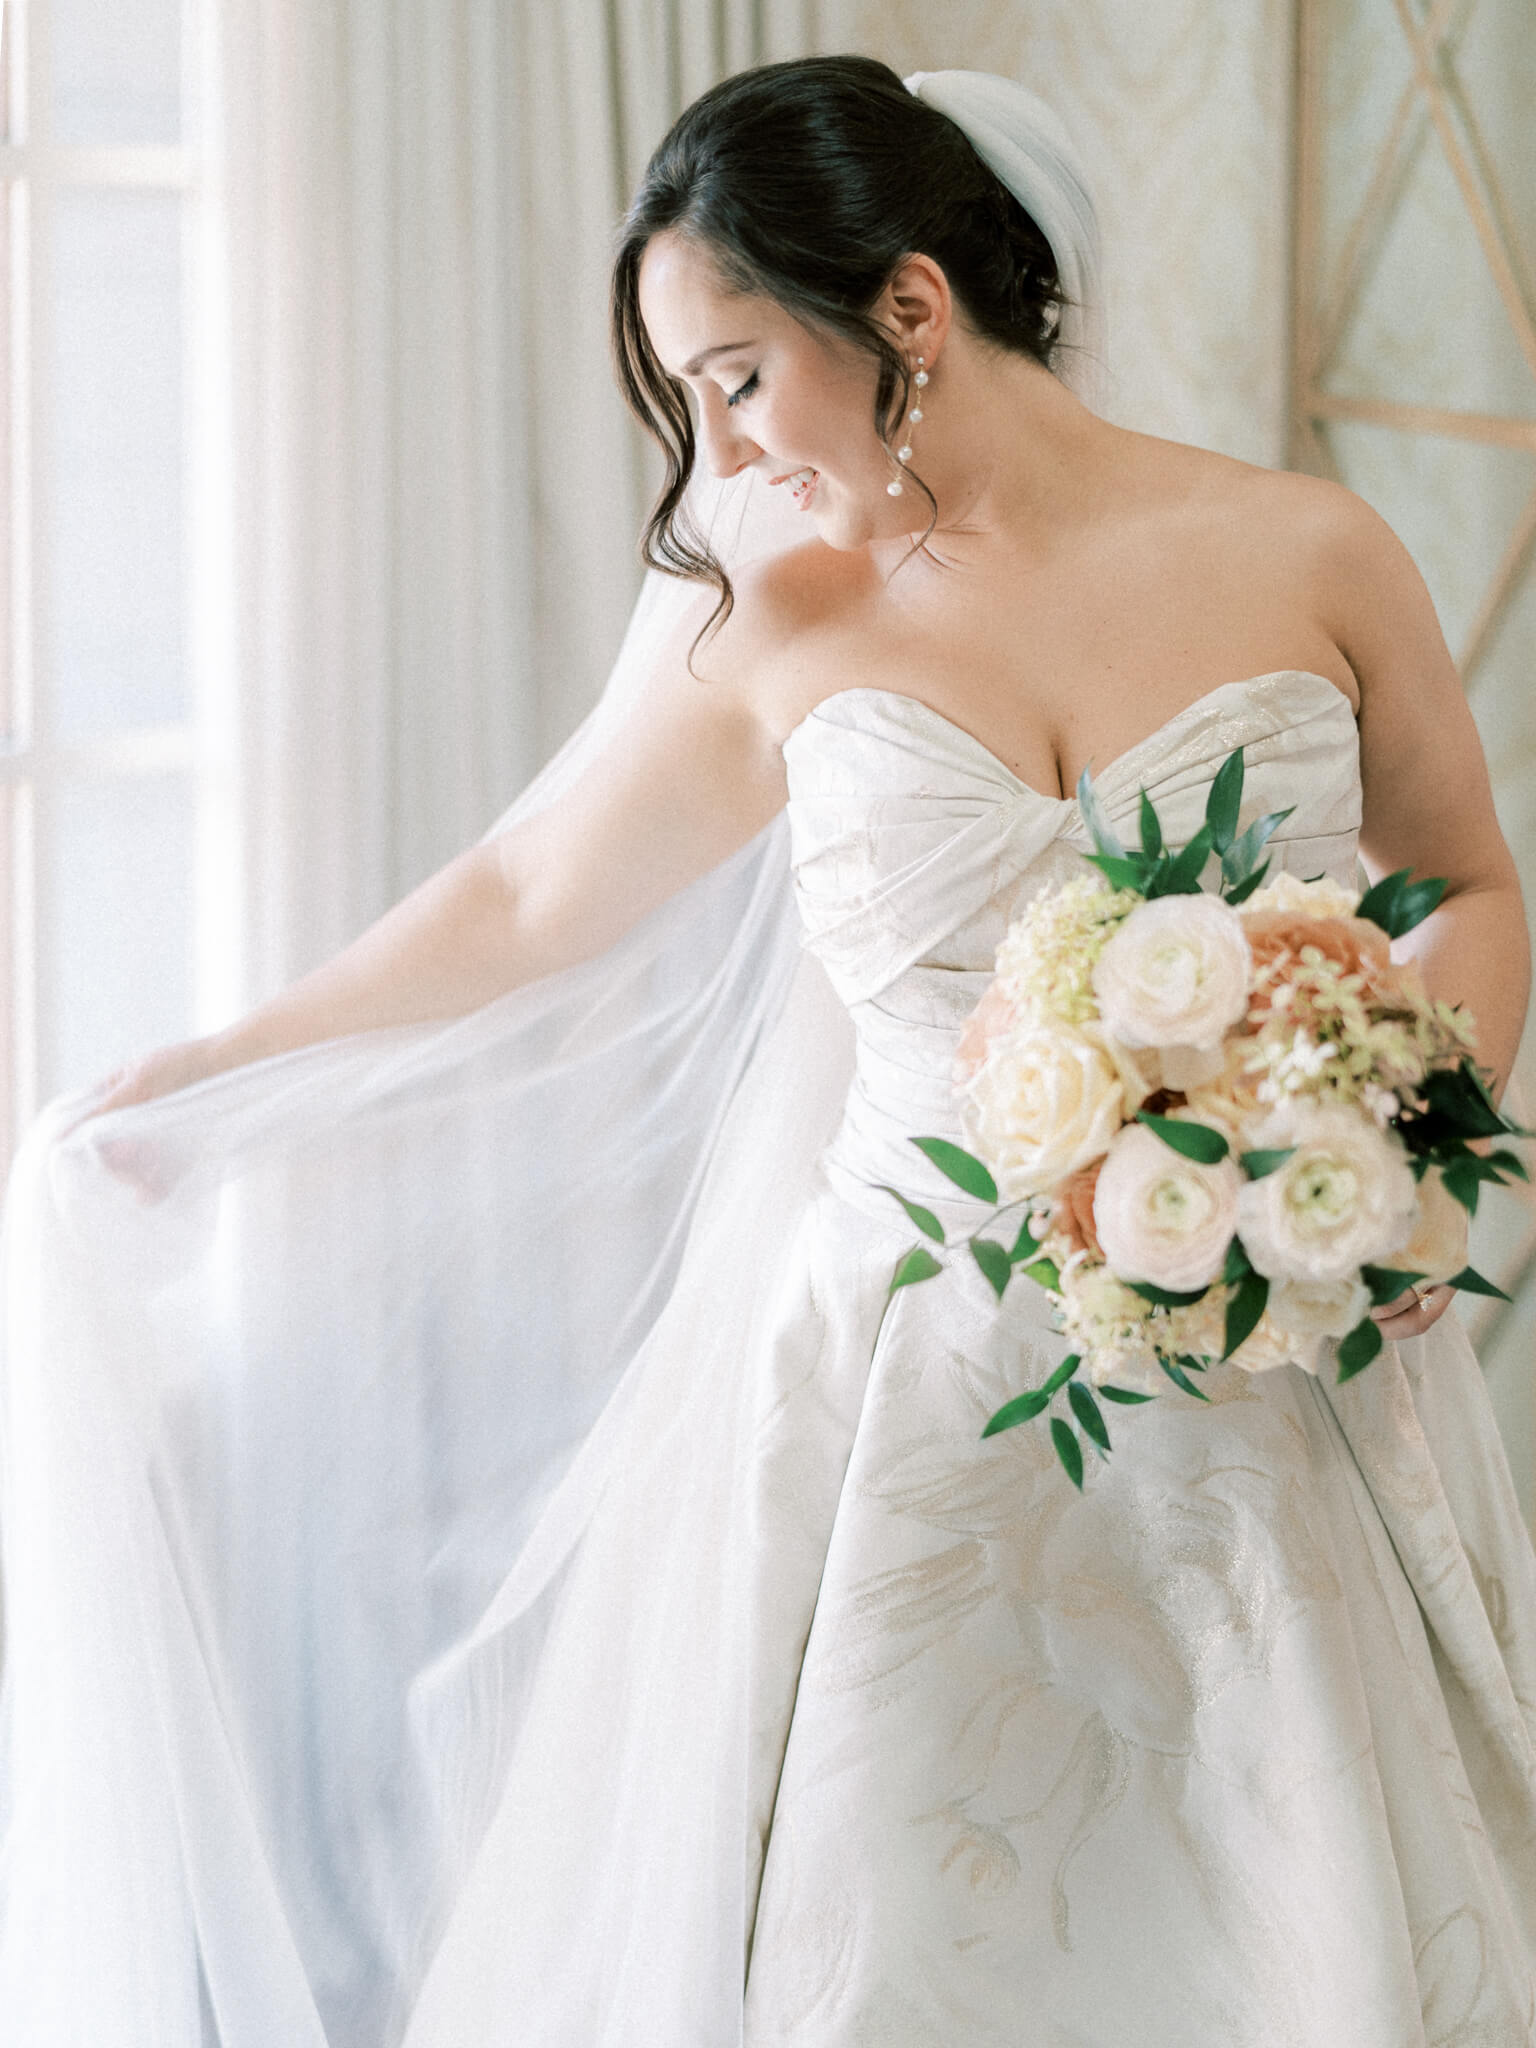 Closeup of a bride in her wedding gown holding her bouquet and playing with her veil.